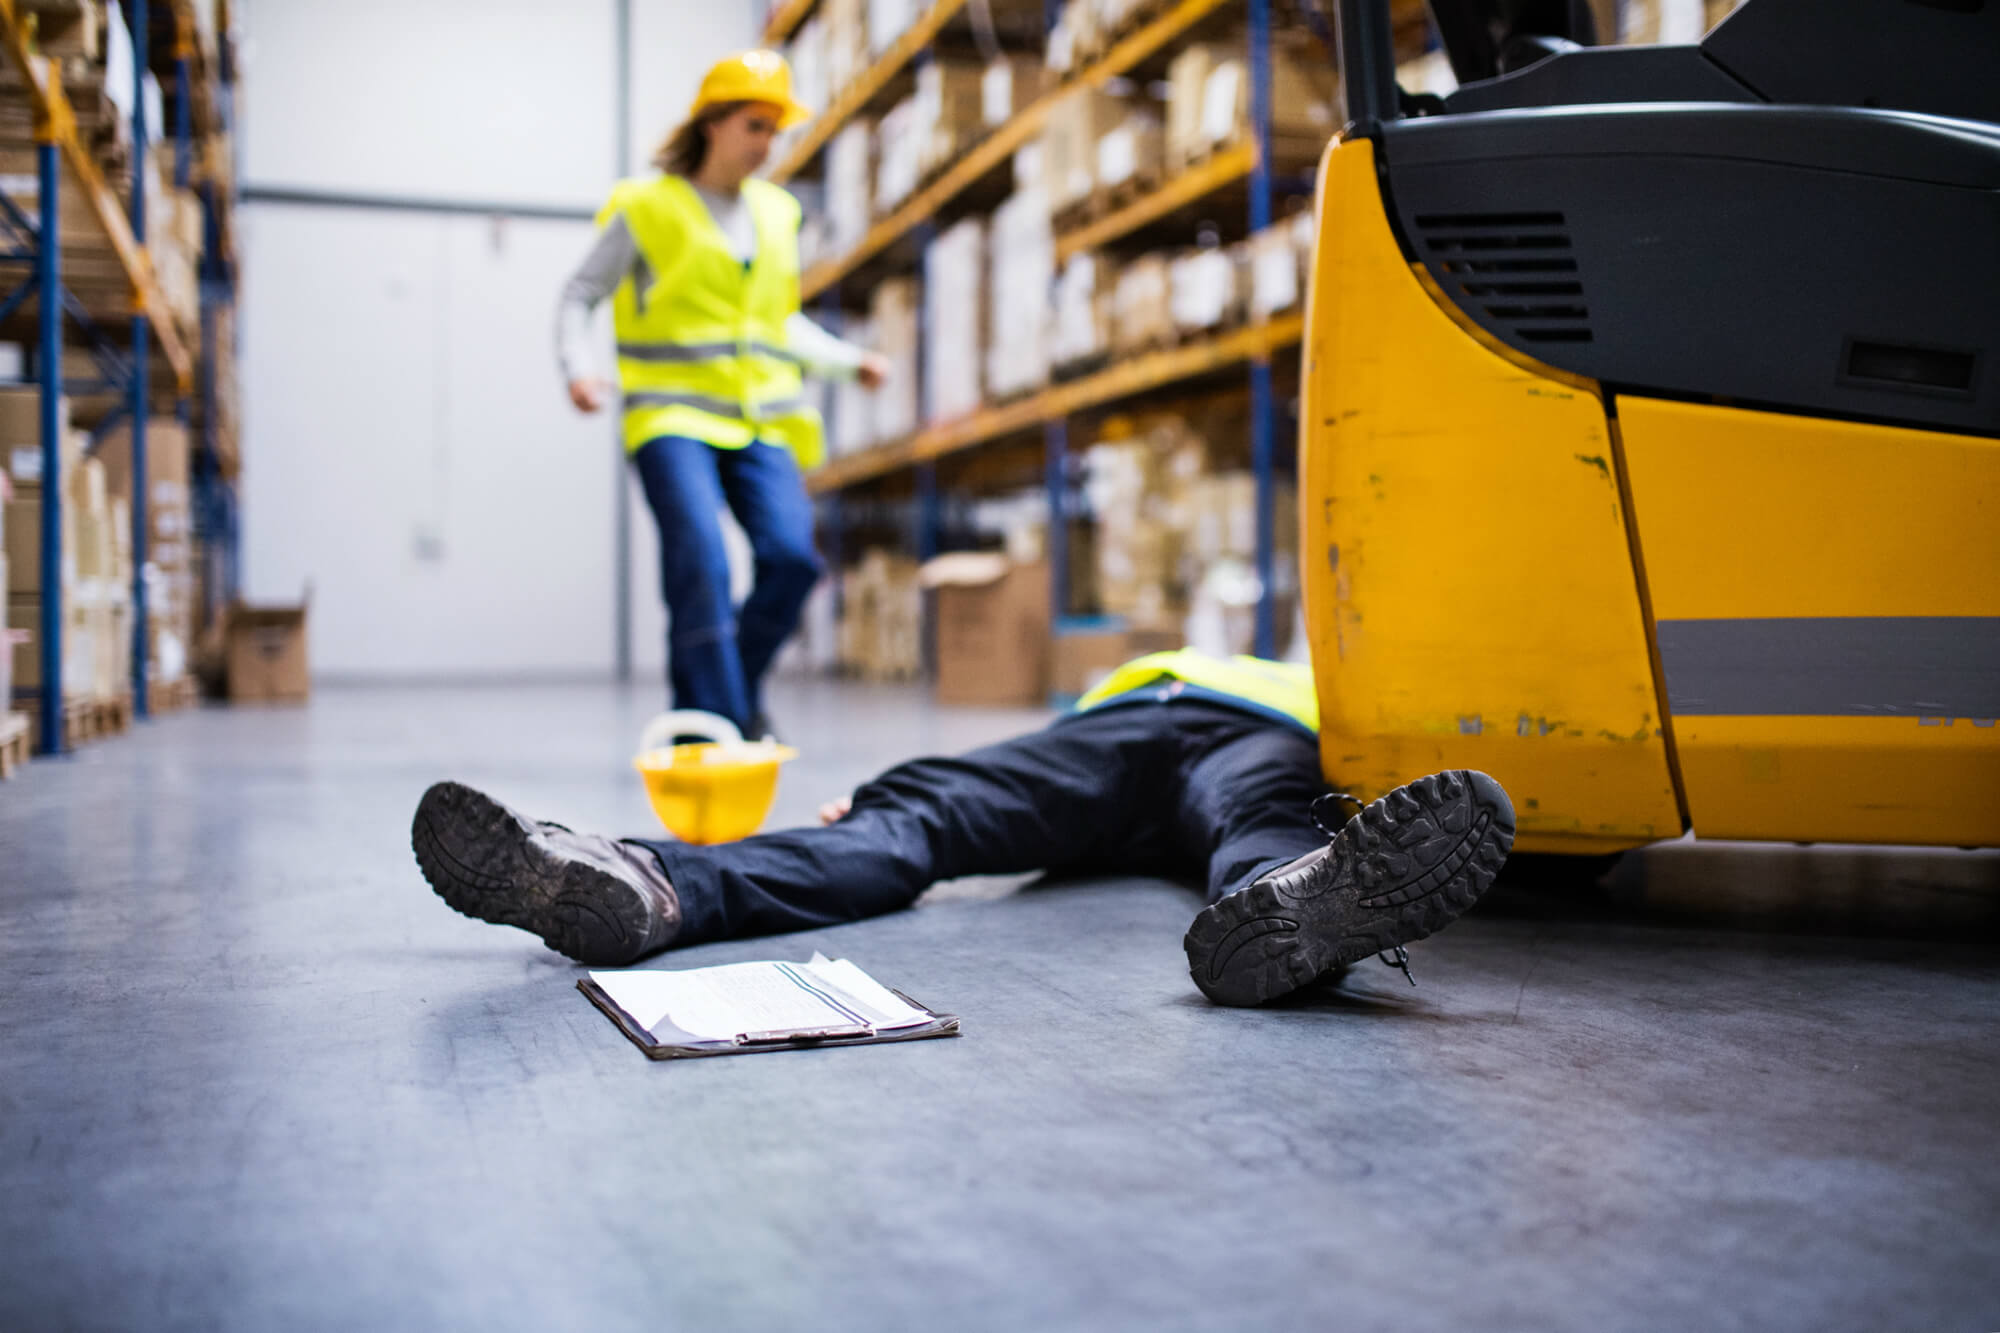 Forklift Truckload Falls By Accident On An Electrician